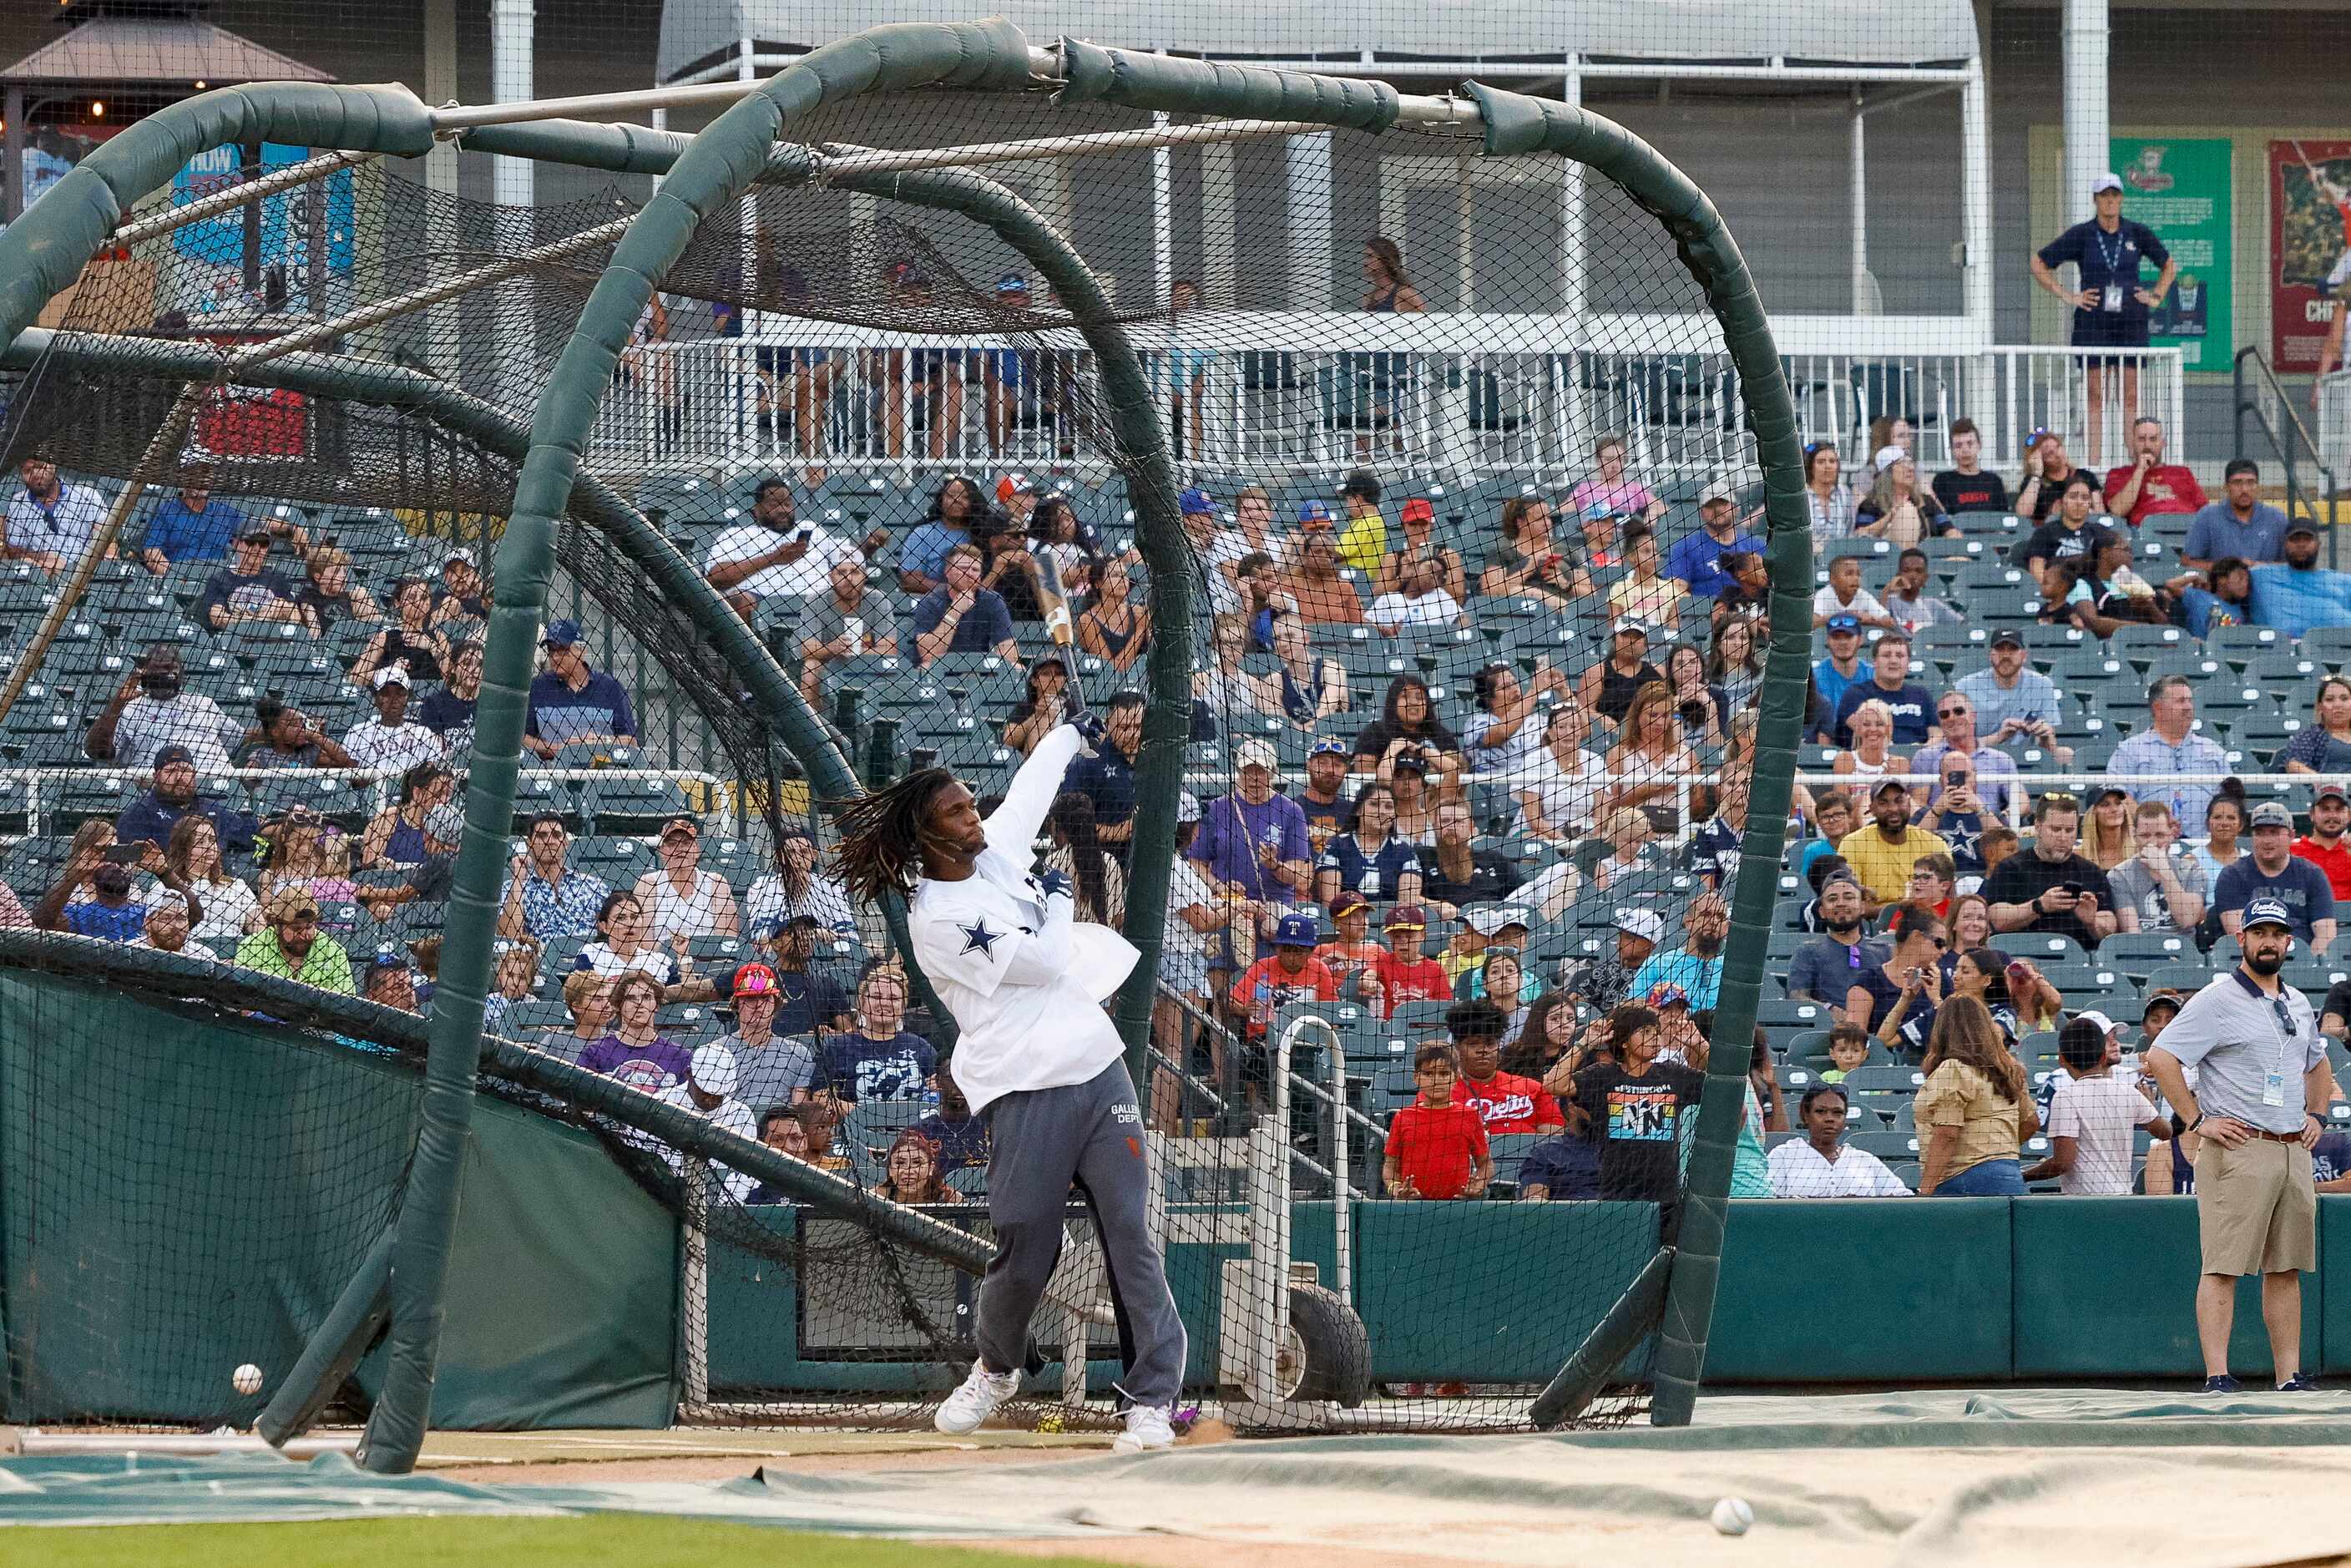 Dallas Cowboys wide receiver CeeDee Lamb watches his ball after hitting a home run during...